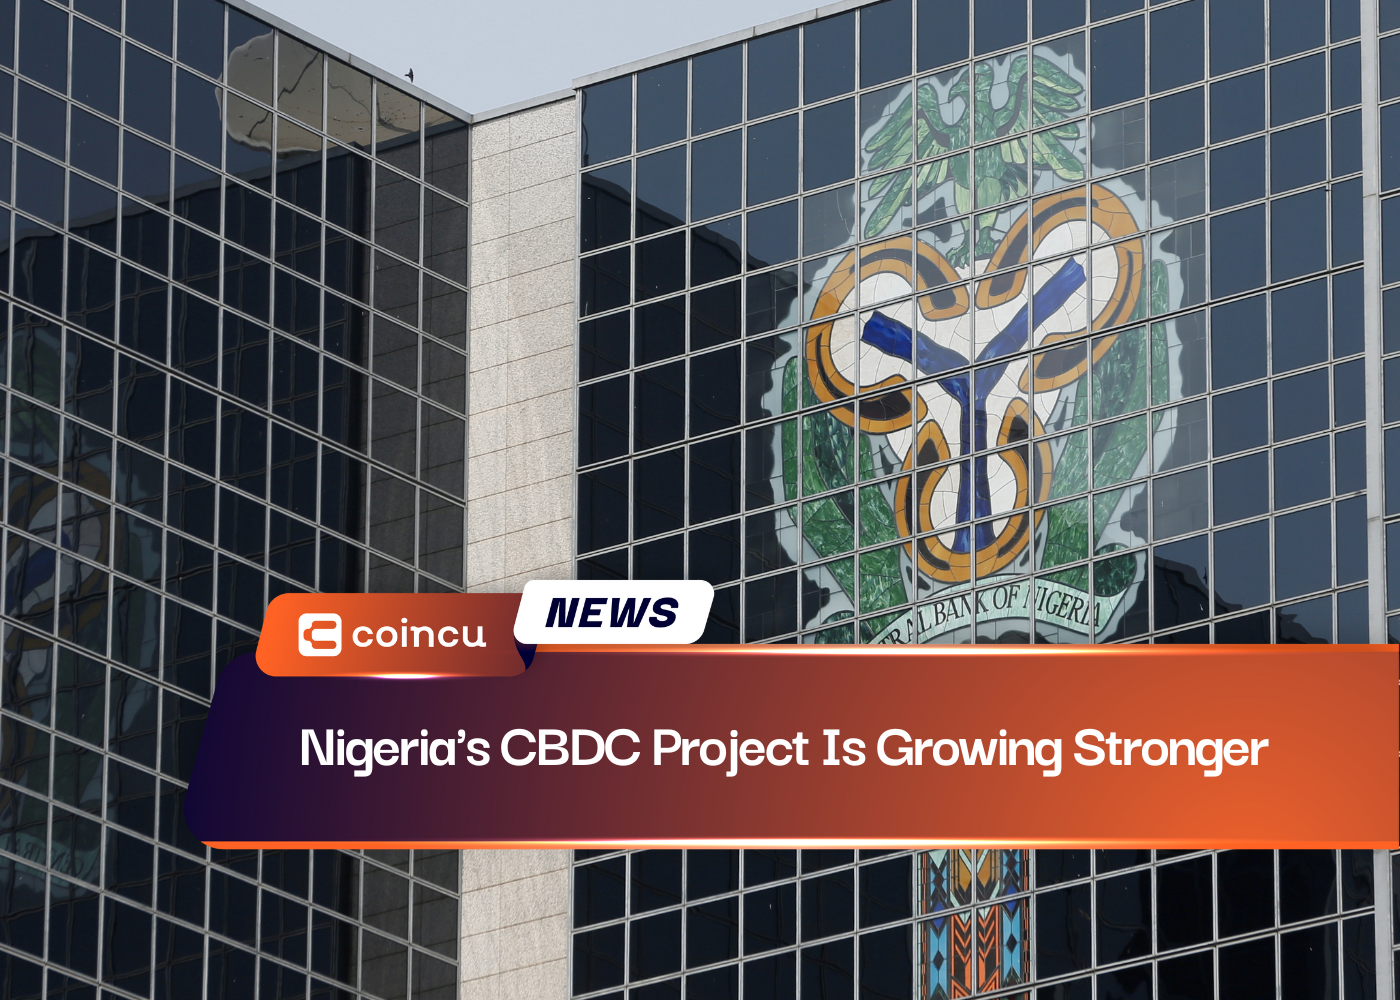 Nigeria's CBDC Project Is Growing Stronger